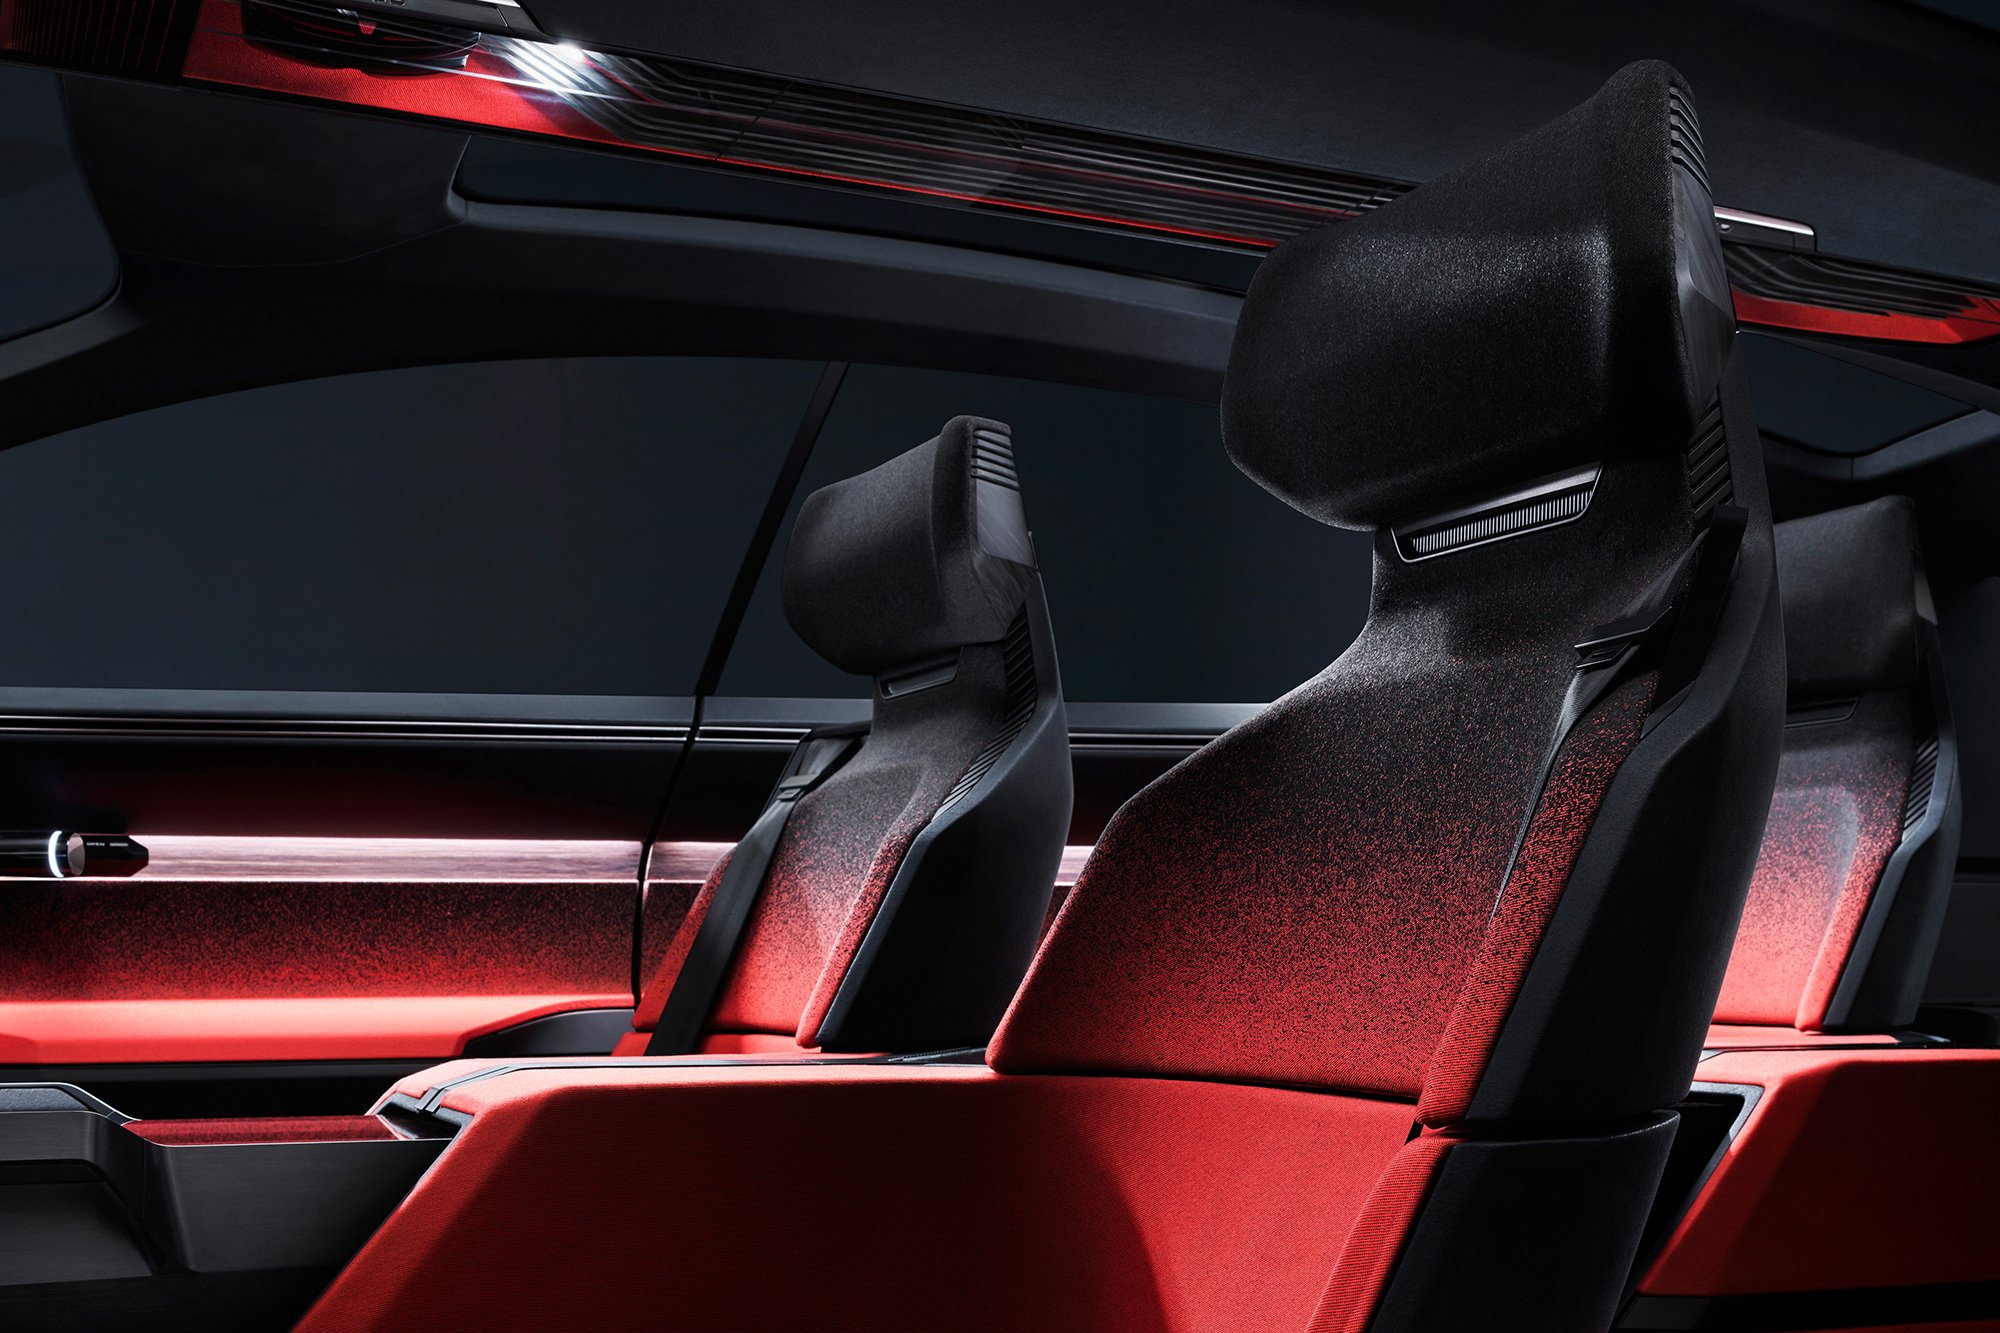 The interior design of the Audi activesphere concept